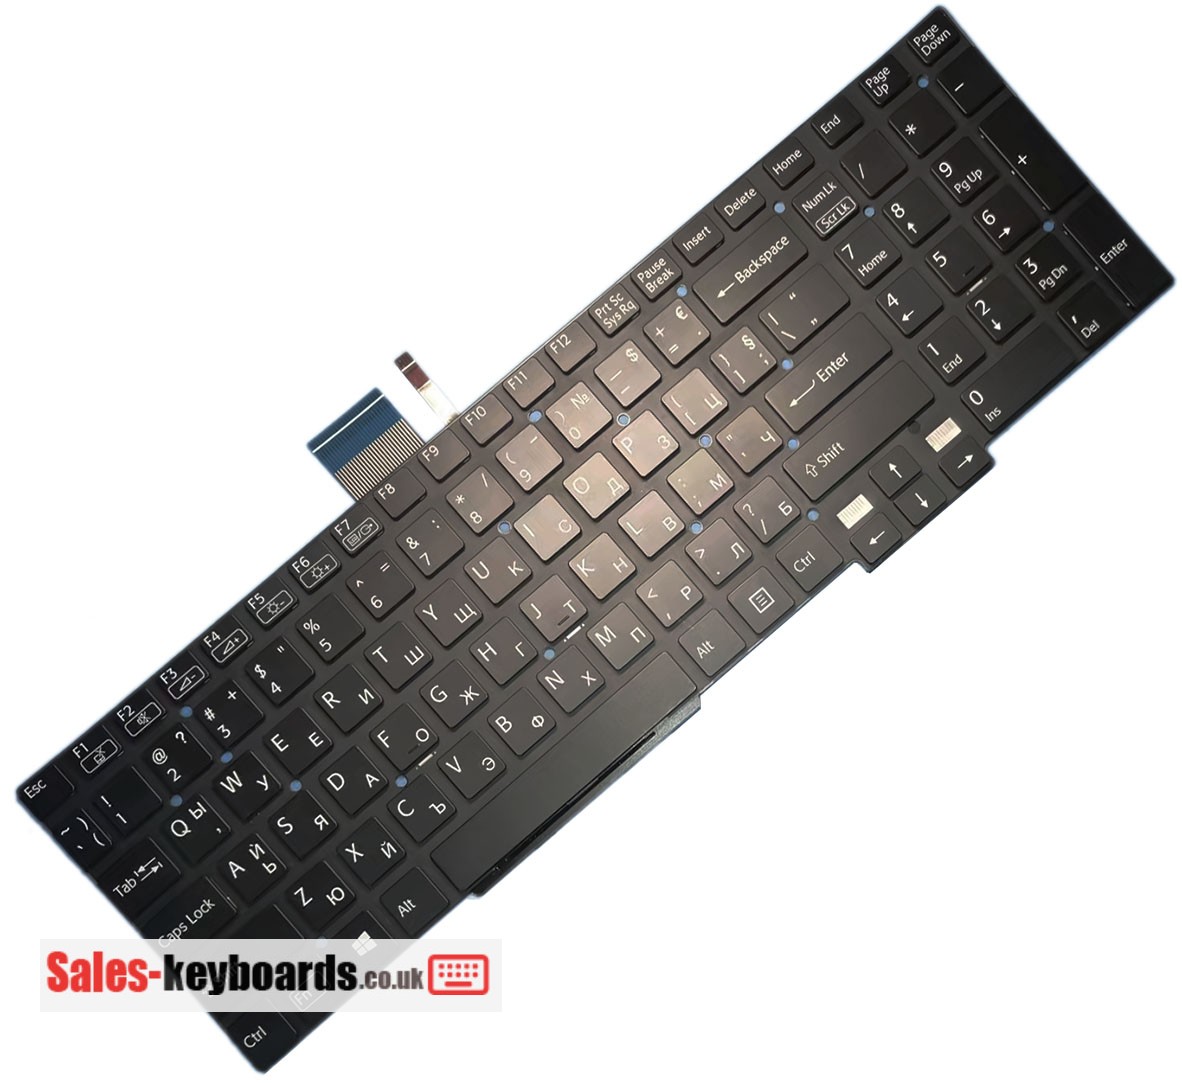 Sony VAIO SVT15117CD Keyboard replacement